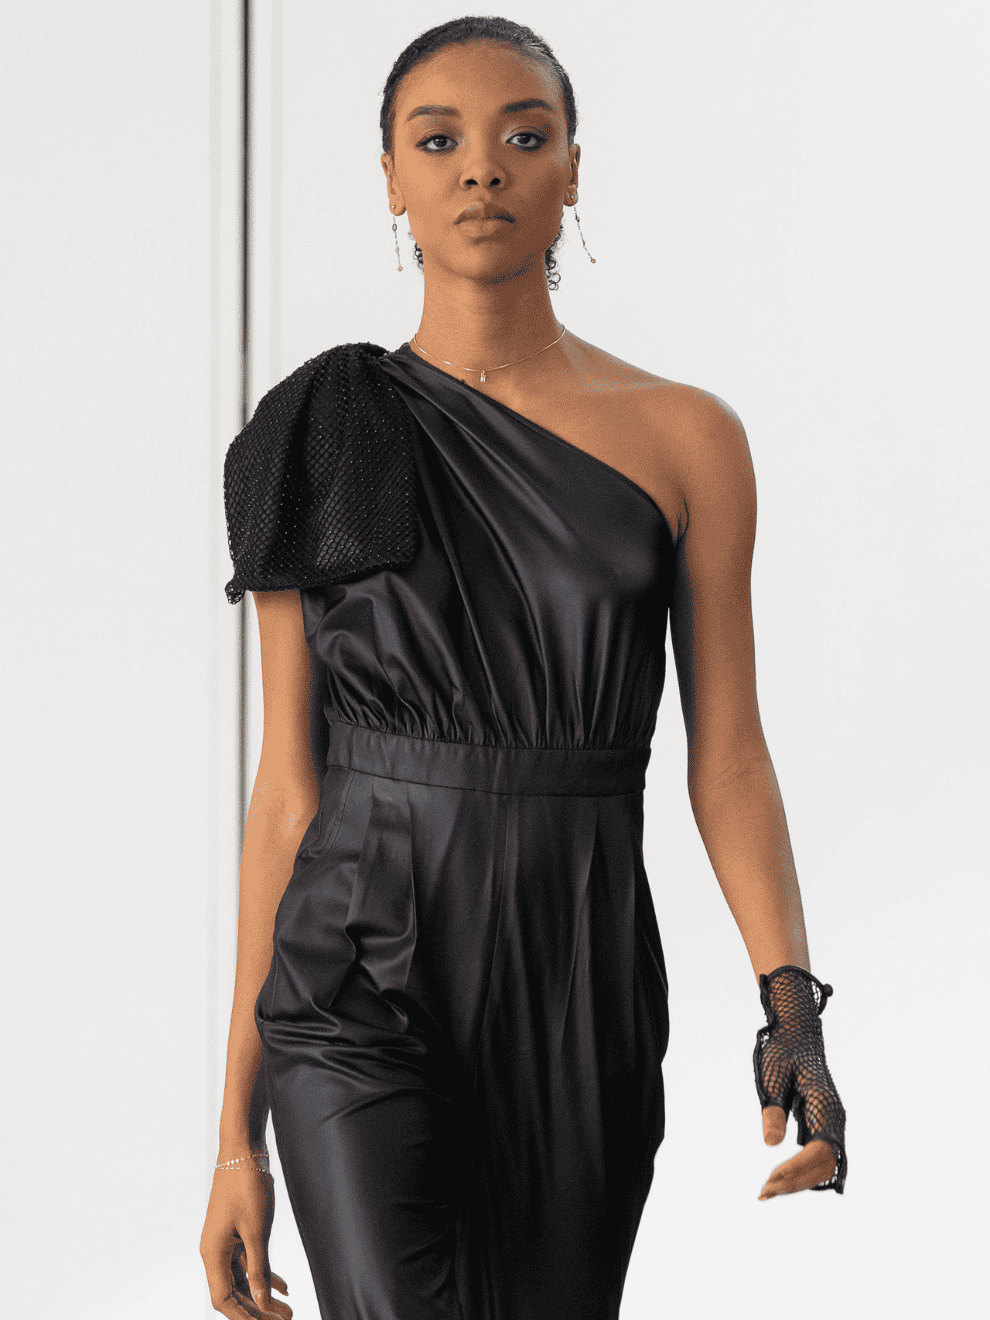 Black One Shoulder Jumpsuit with a Mesh Bow, a product by tara and i